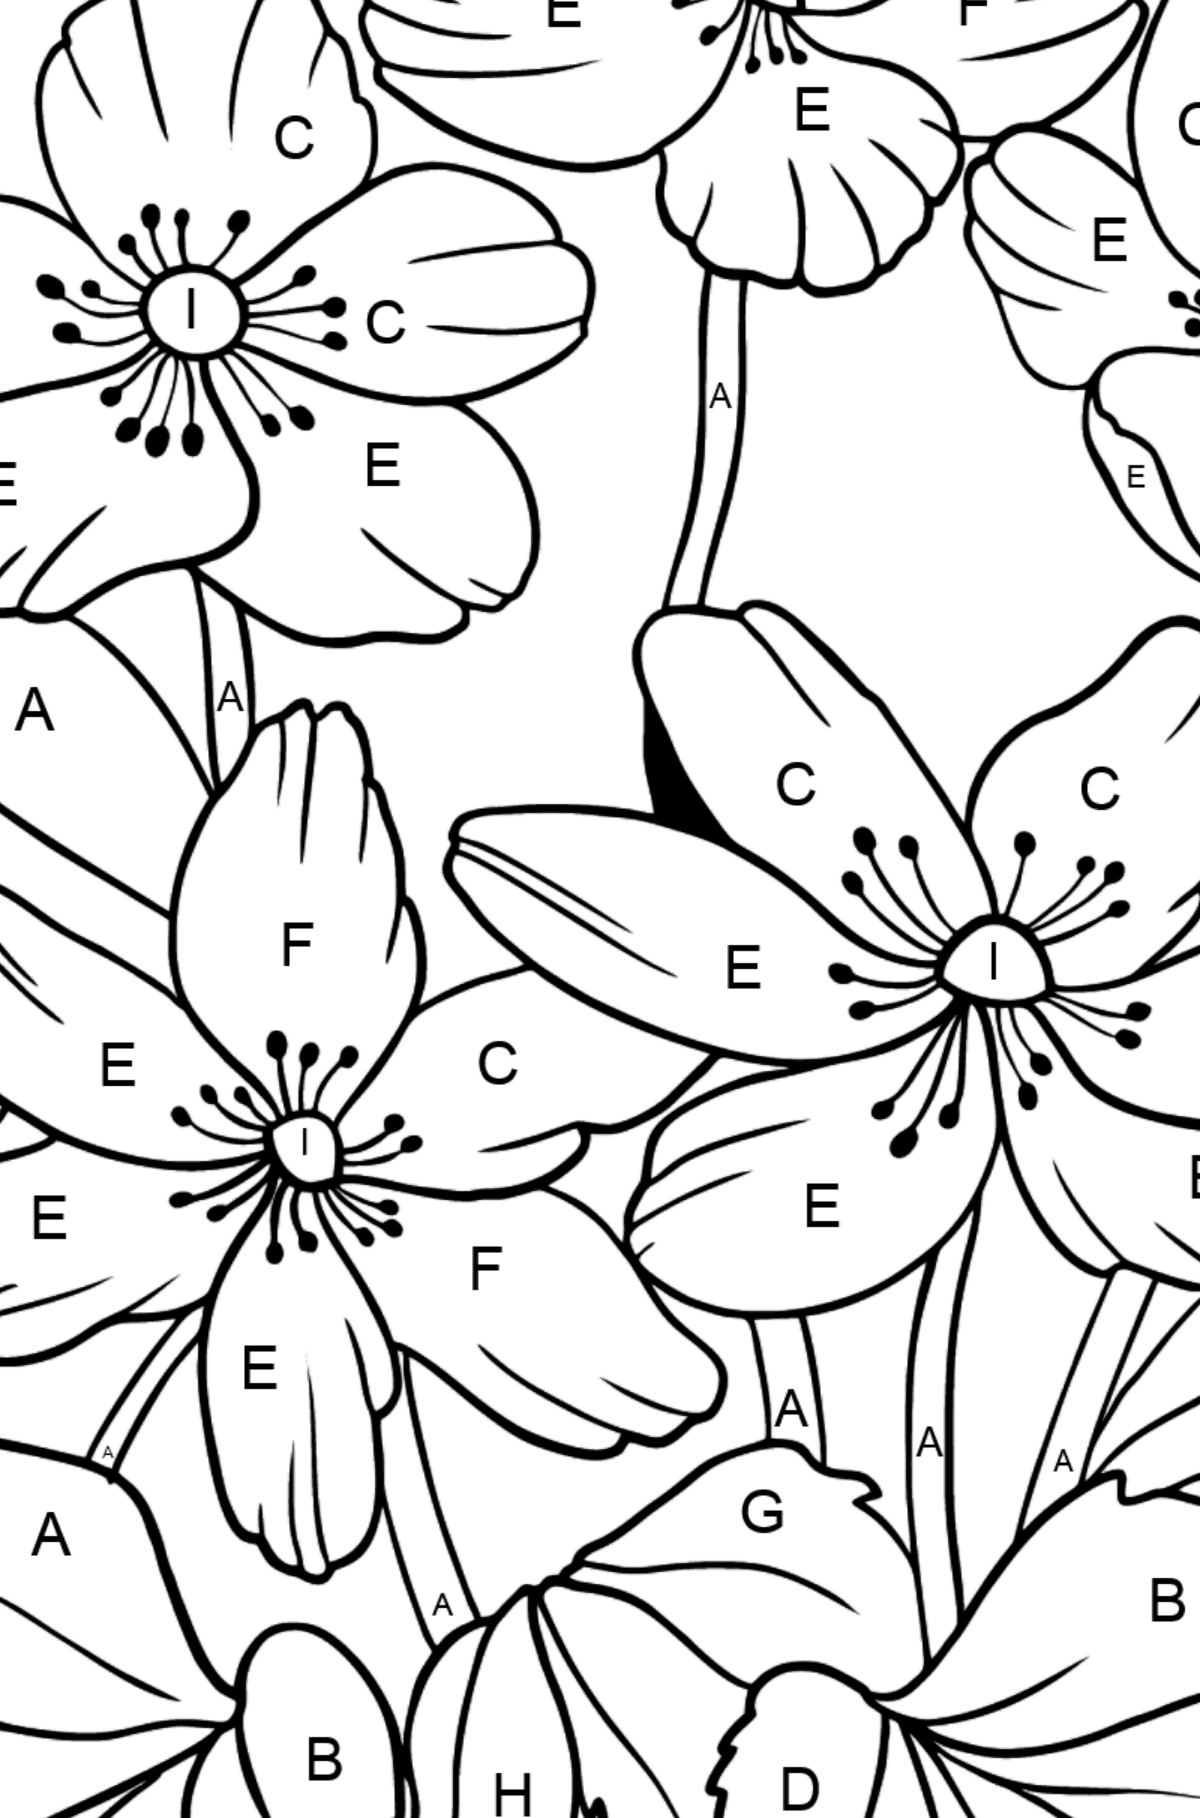 Flower Coloring Page - A Windflower with Yellow Petals - Coloring by Letters for Kids